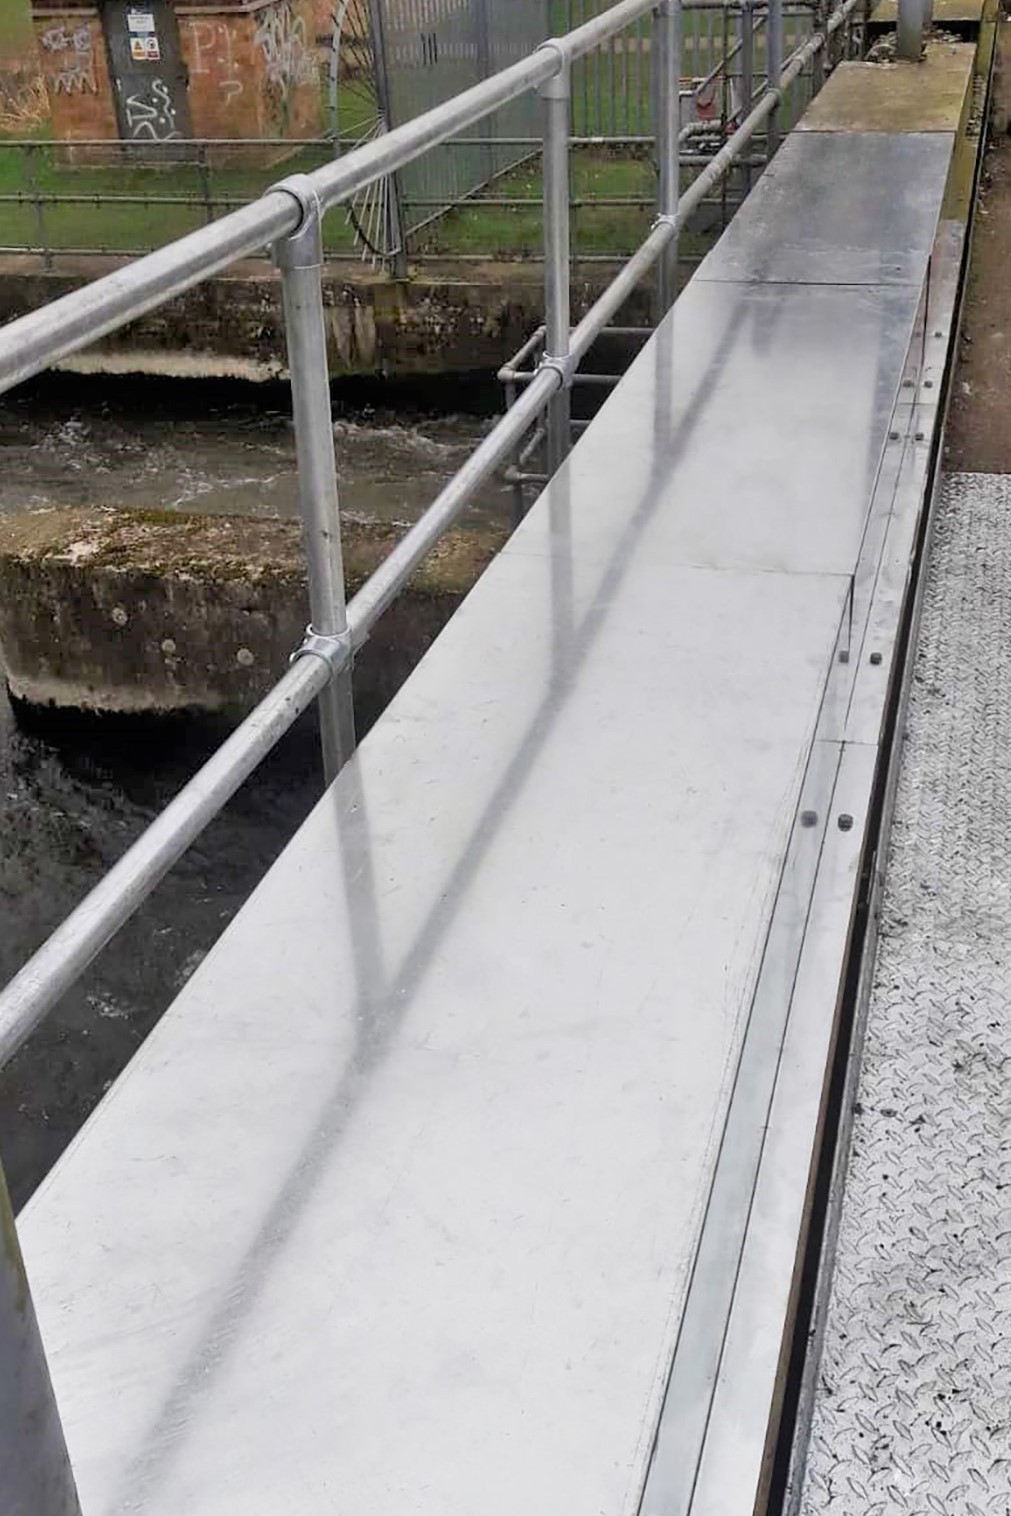 ECS fixed all affected components of Thetford Sluice No.1 gate, supporting the longevity, reliability and operational effectiveness of the now fully functional facility.